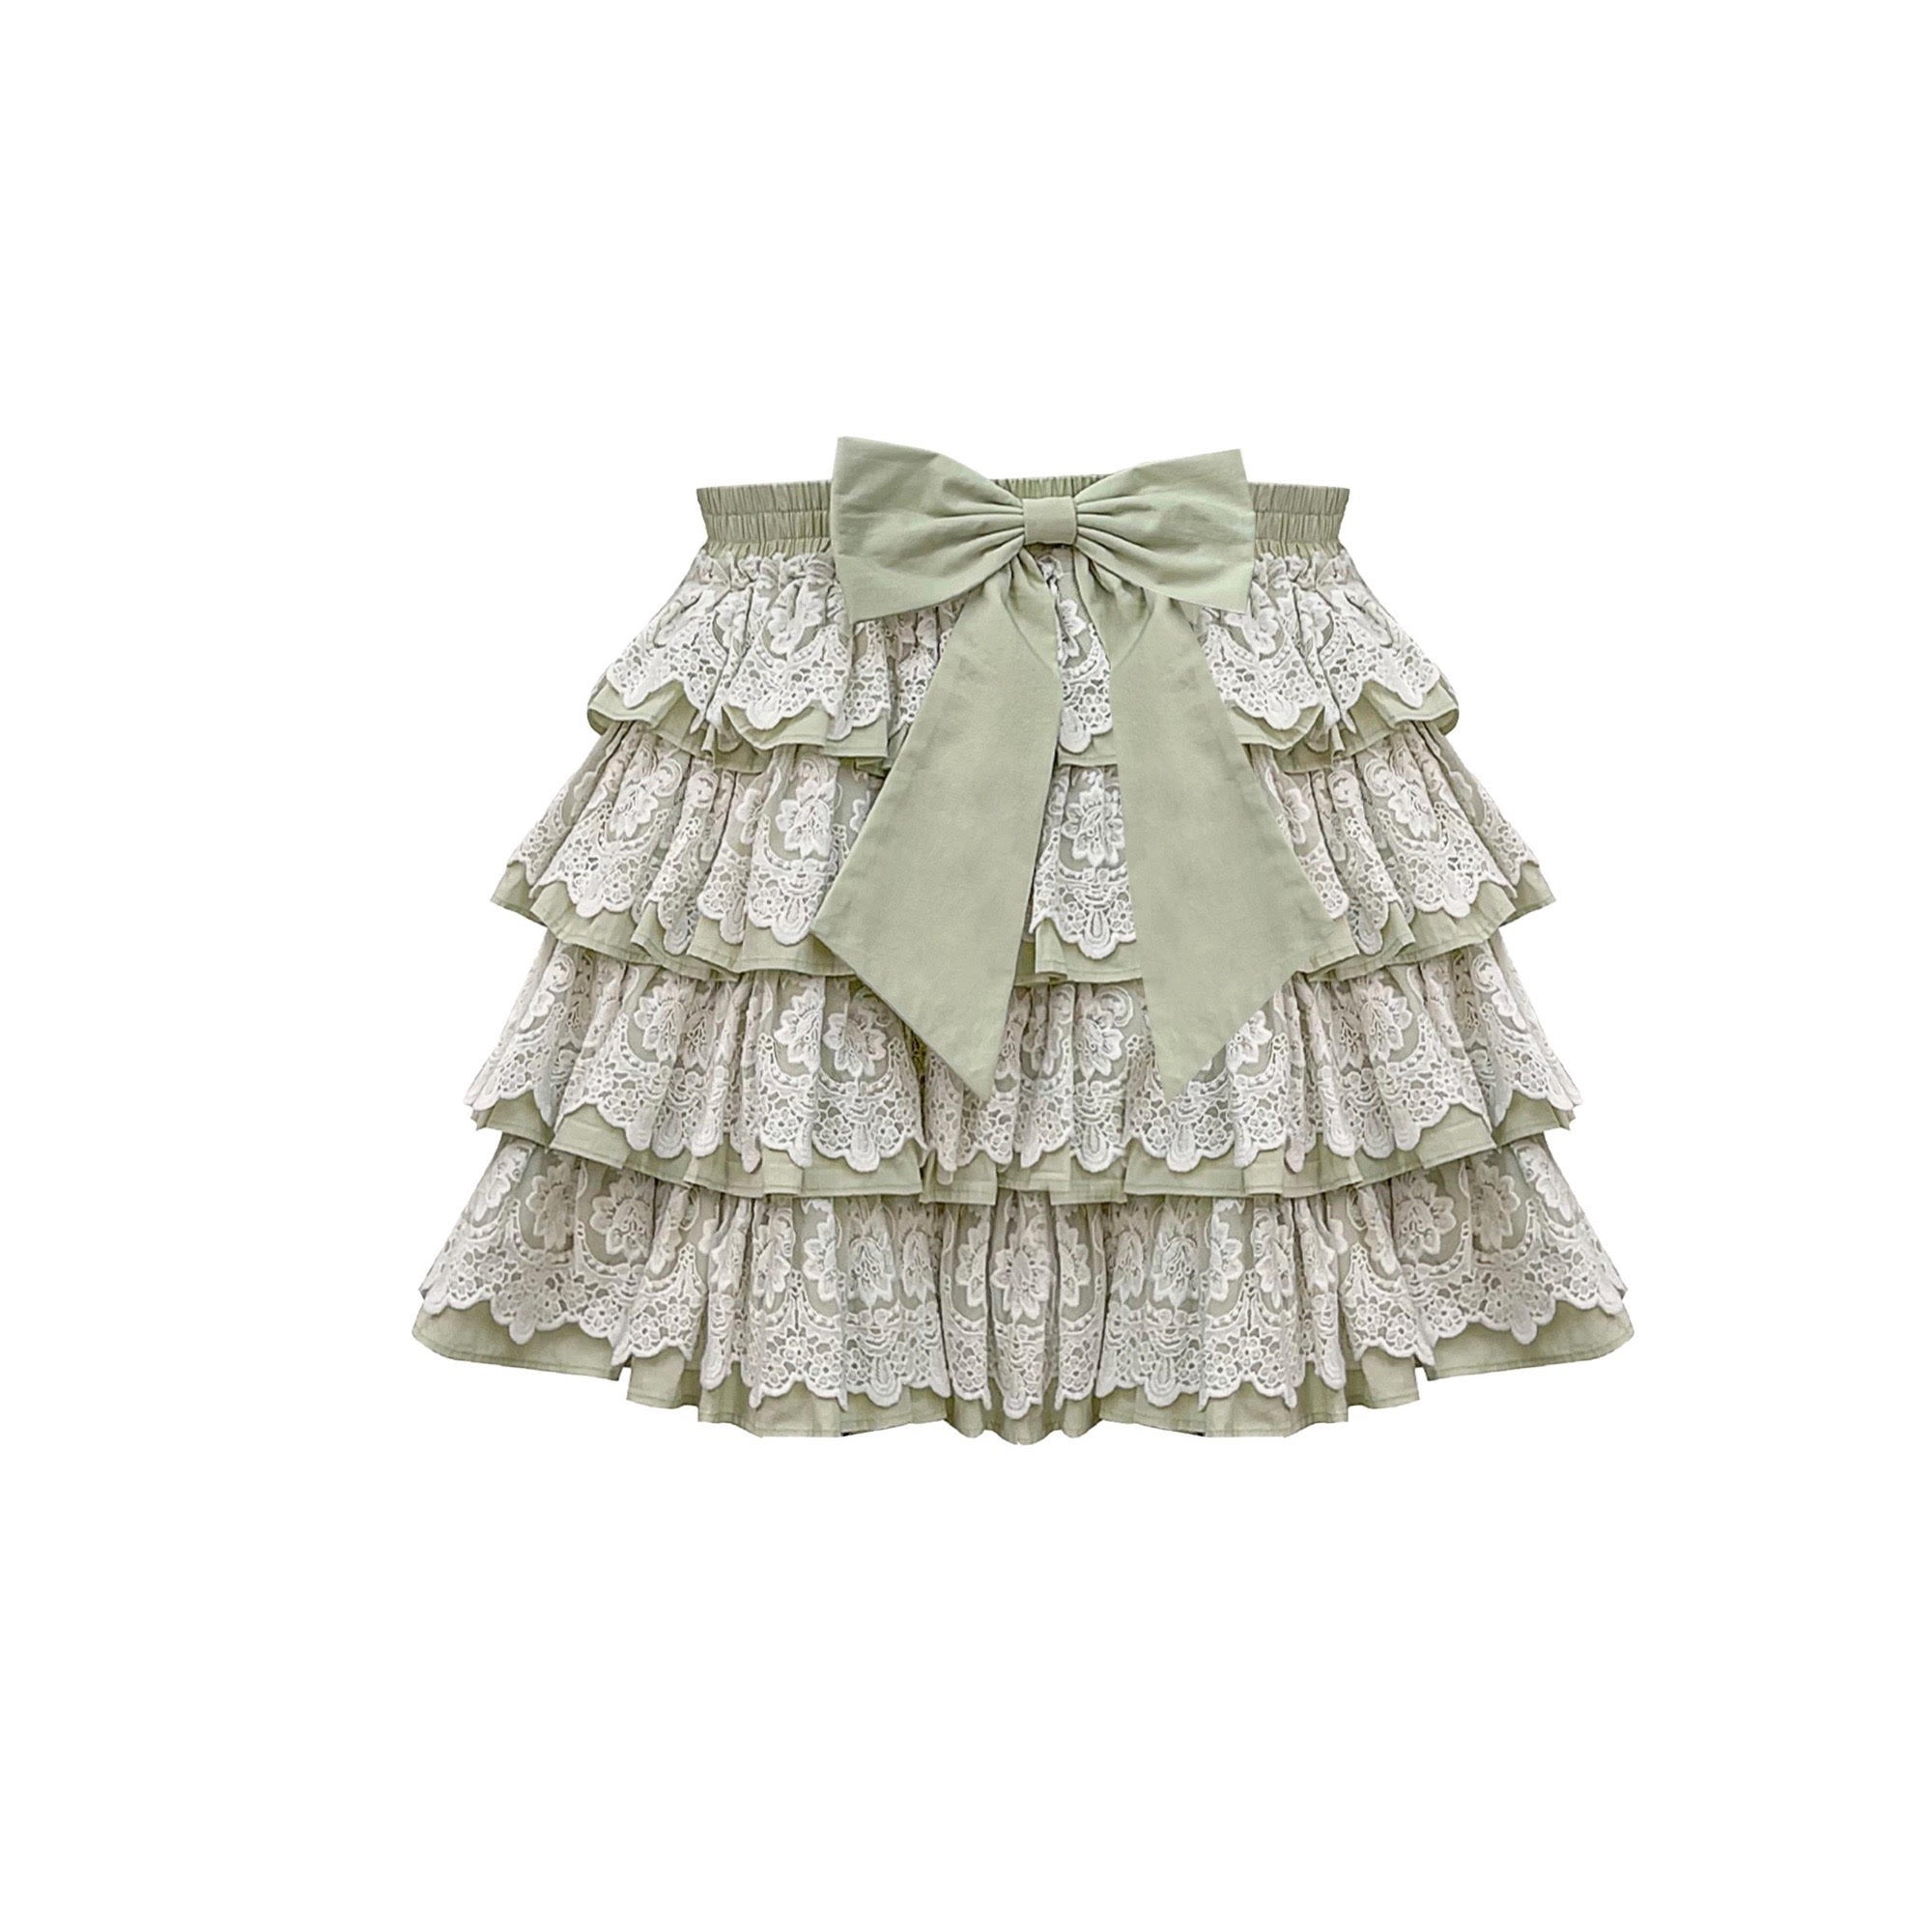 The Lacy Cotton Frill Skirt